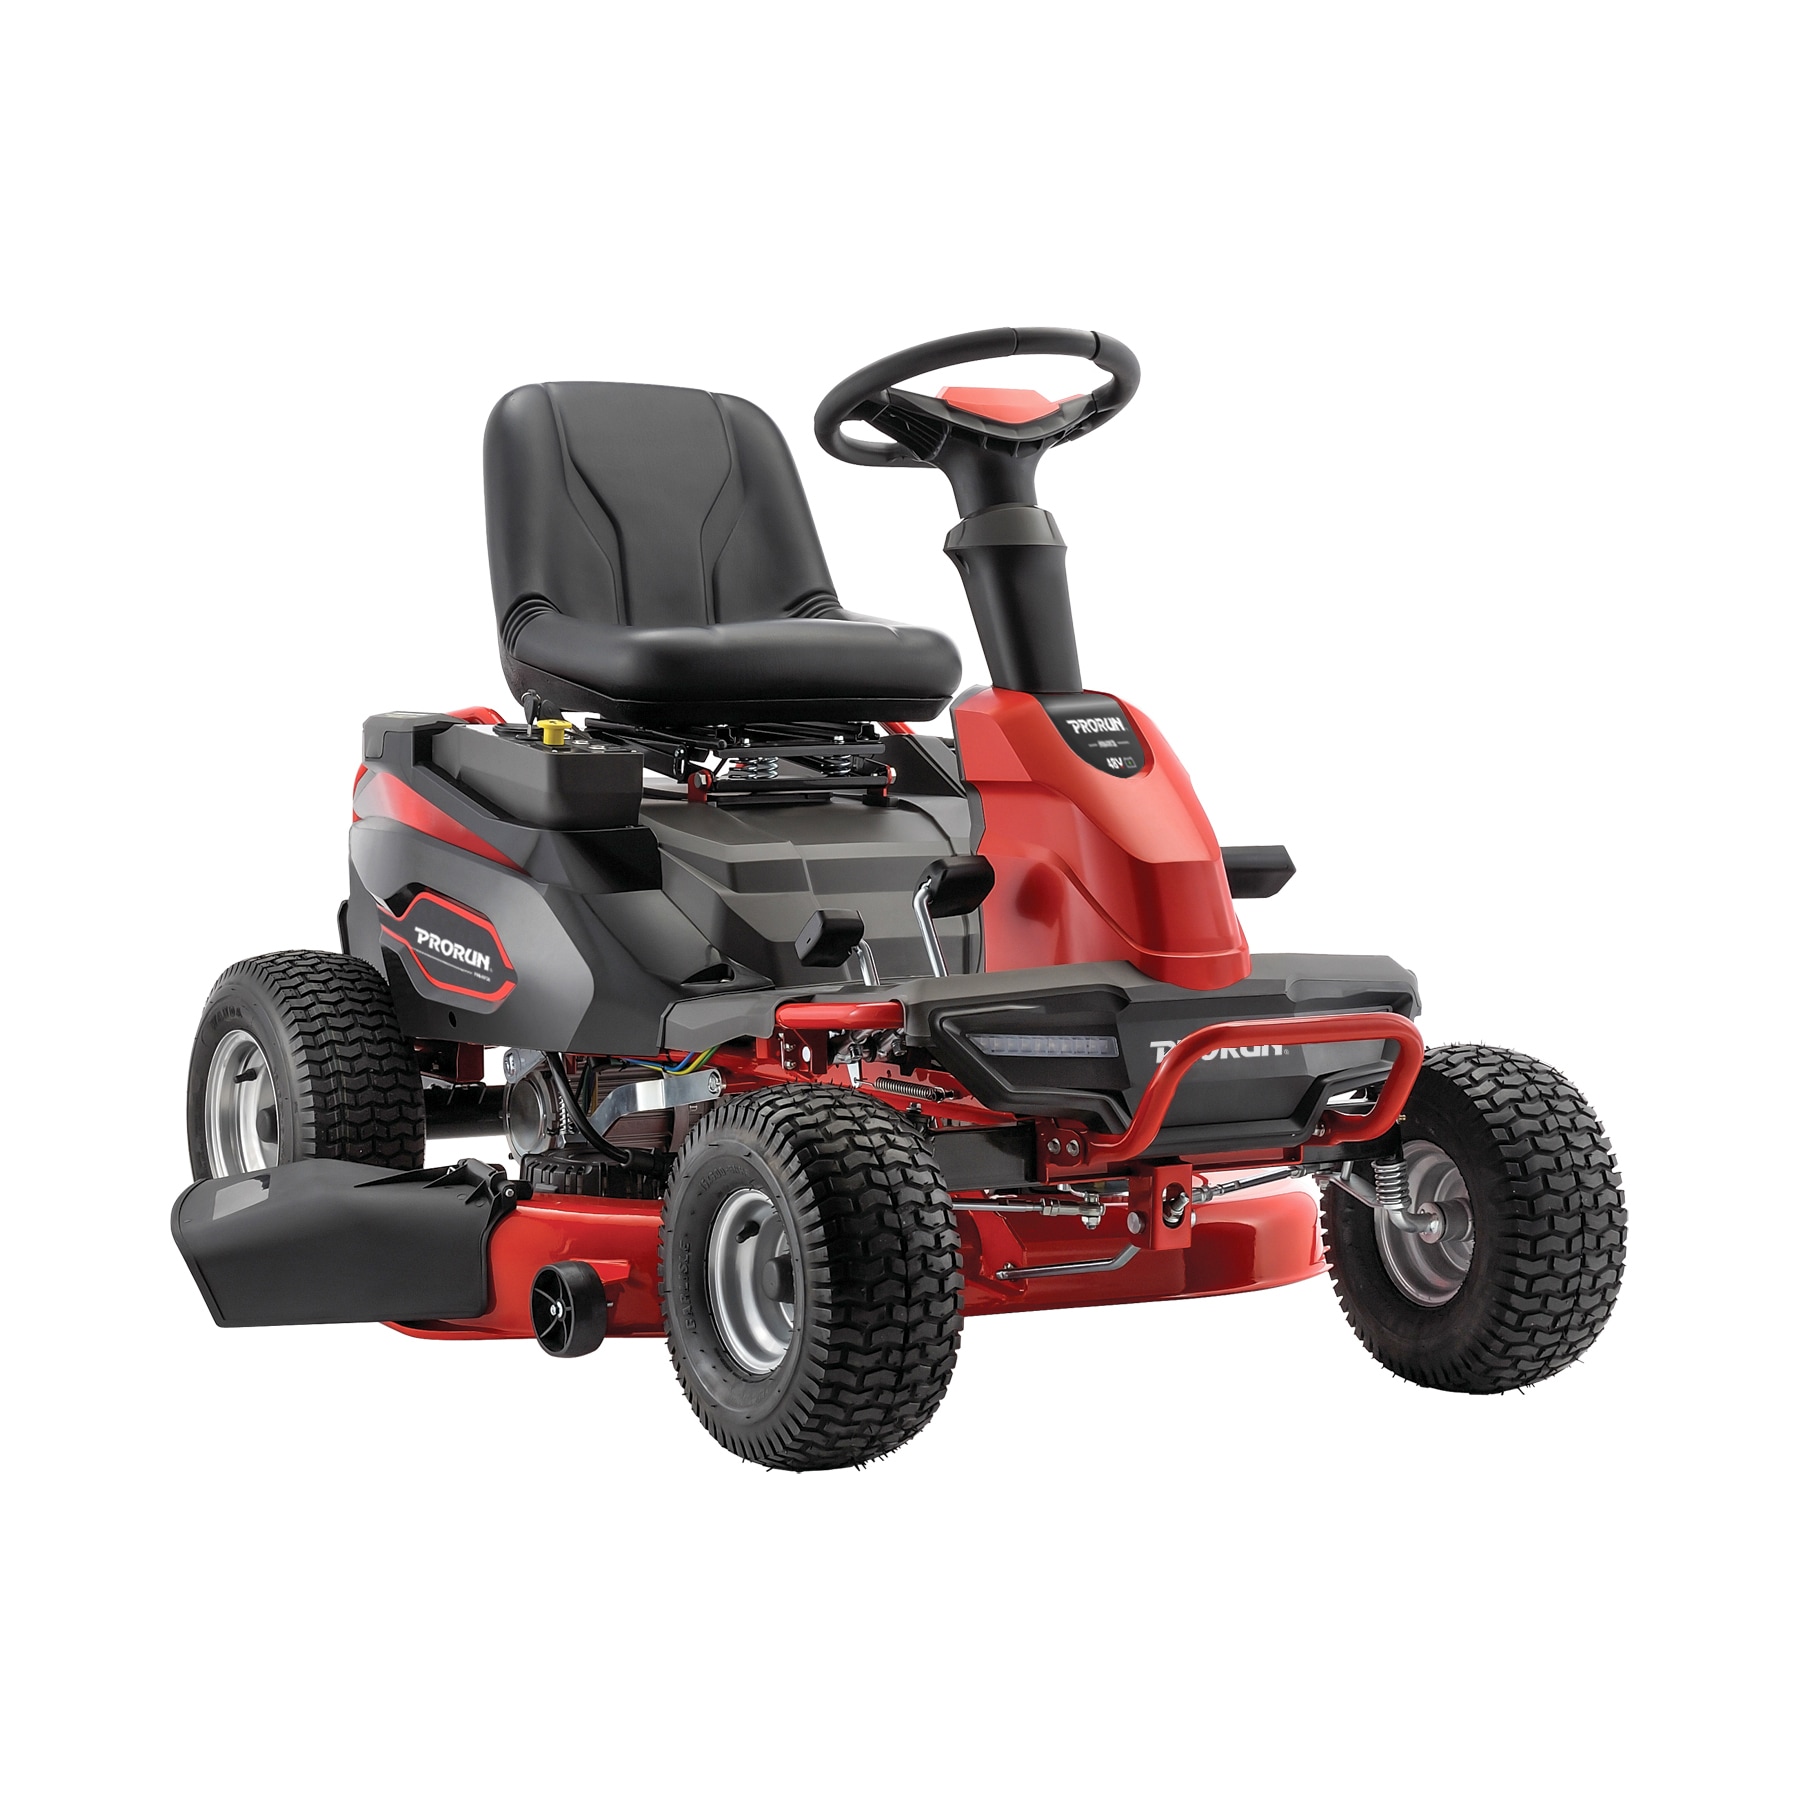 48-volt Battery Lawn Mowers at